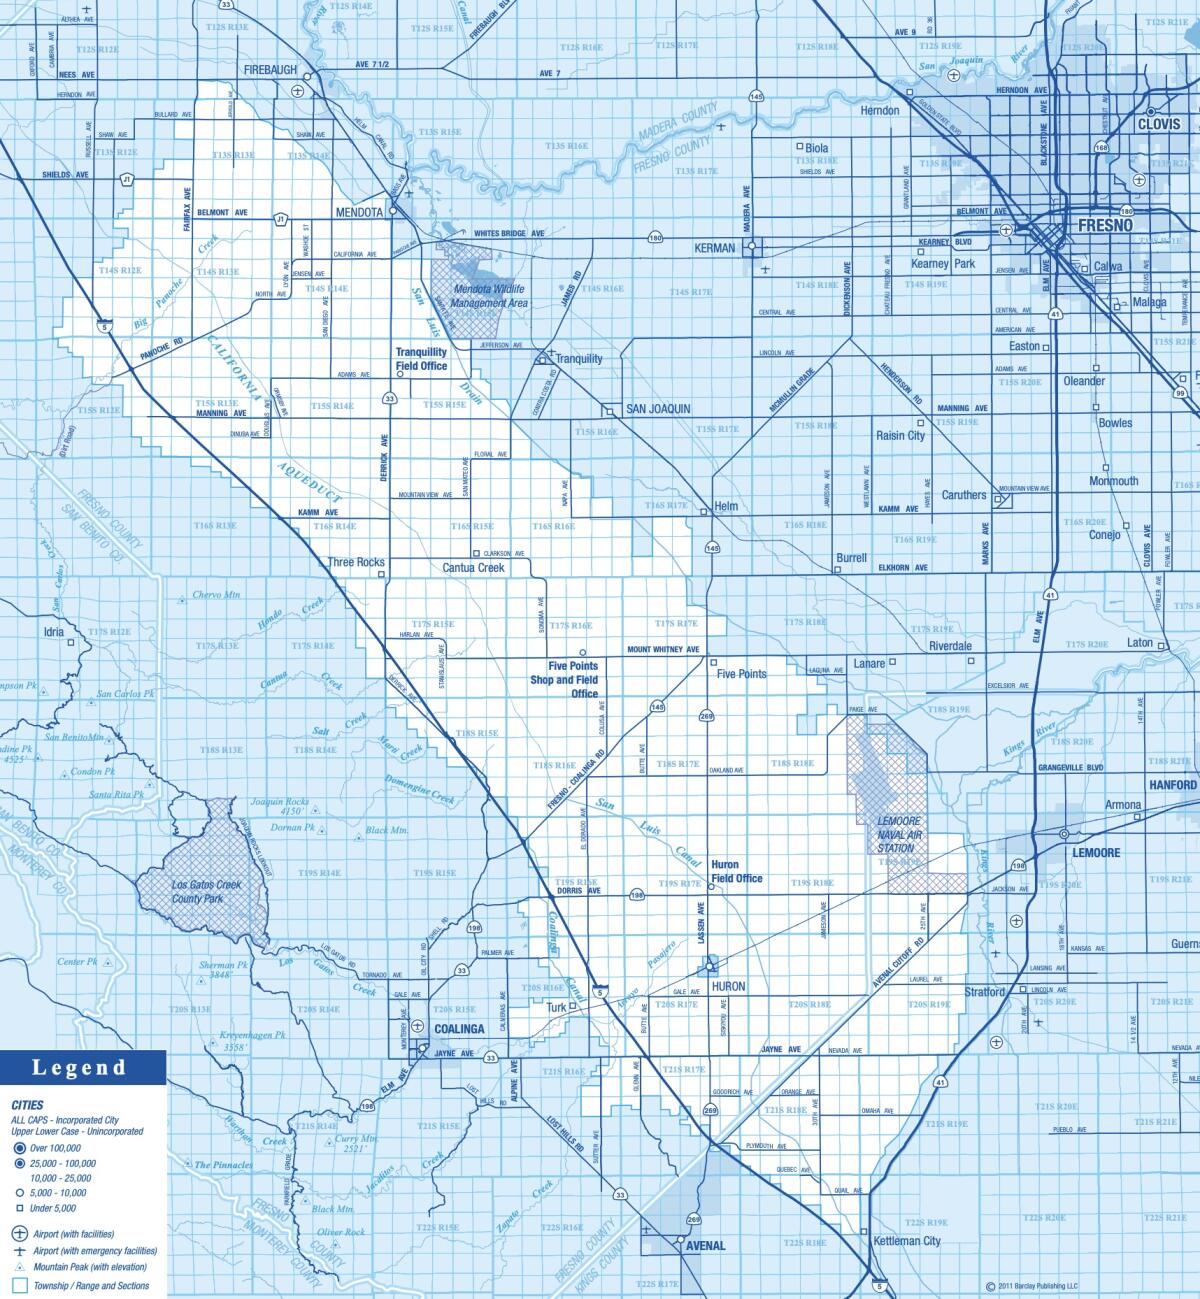 The Westlands Water District occupies a key portion of the Central Valley.